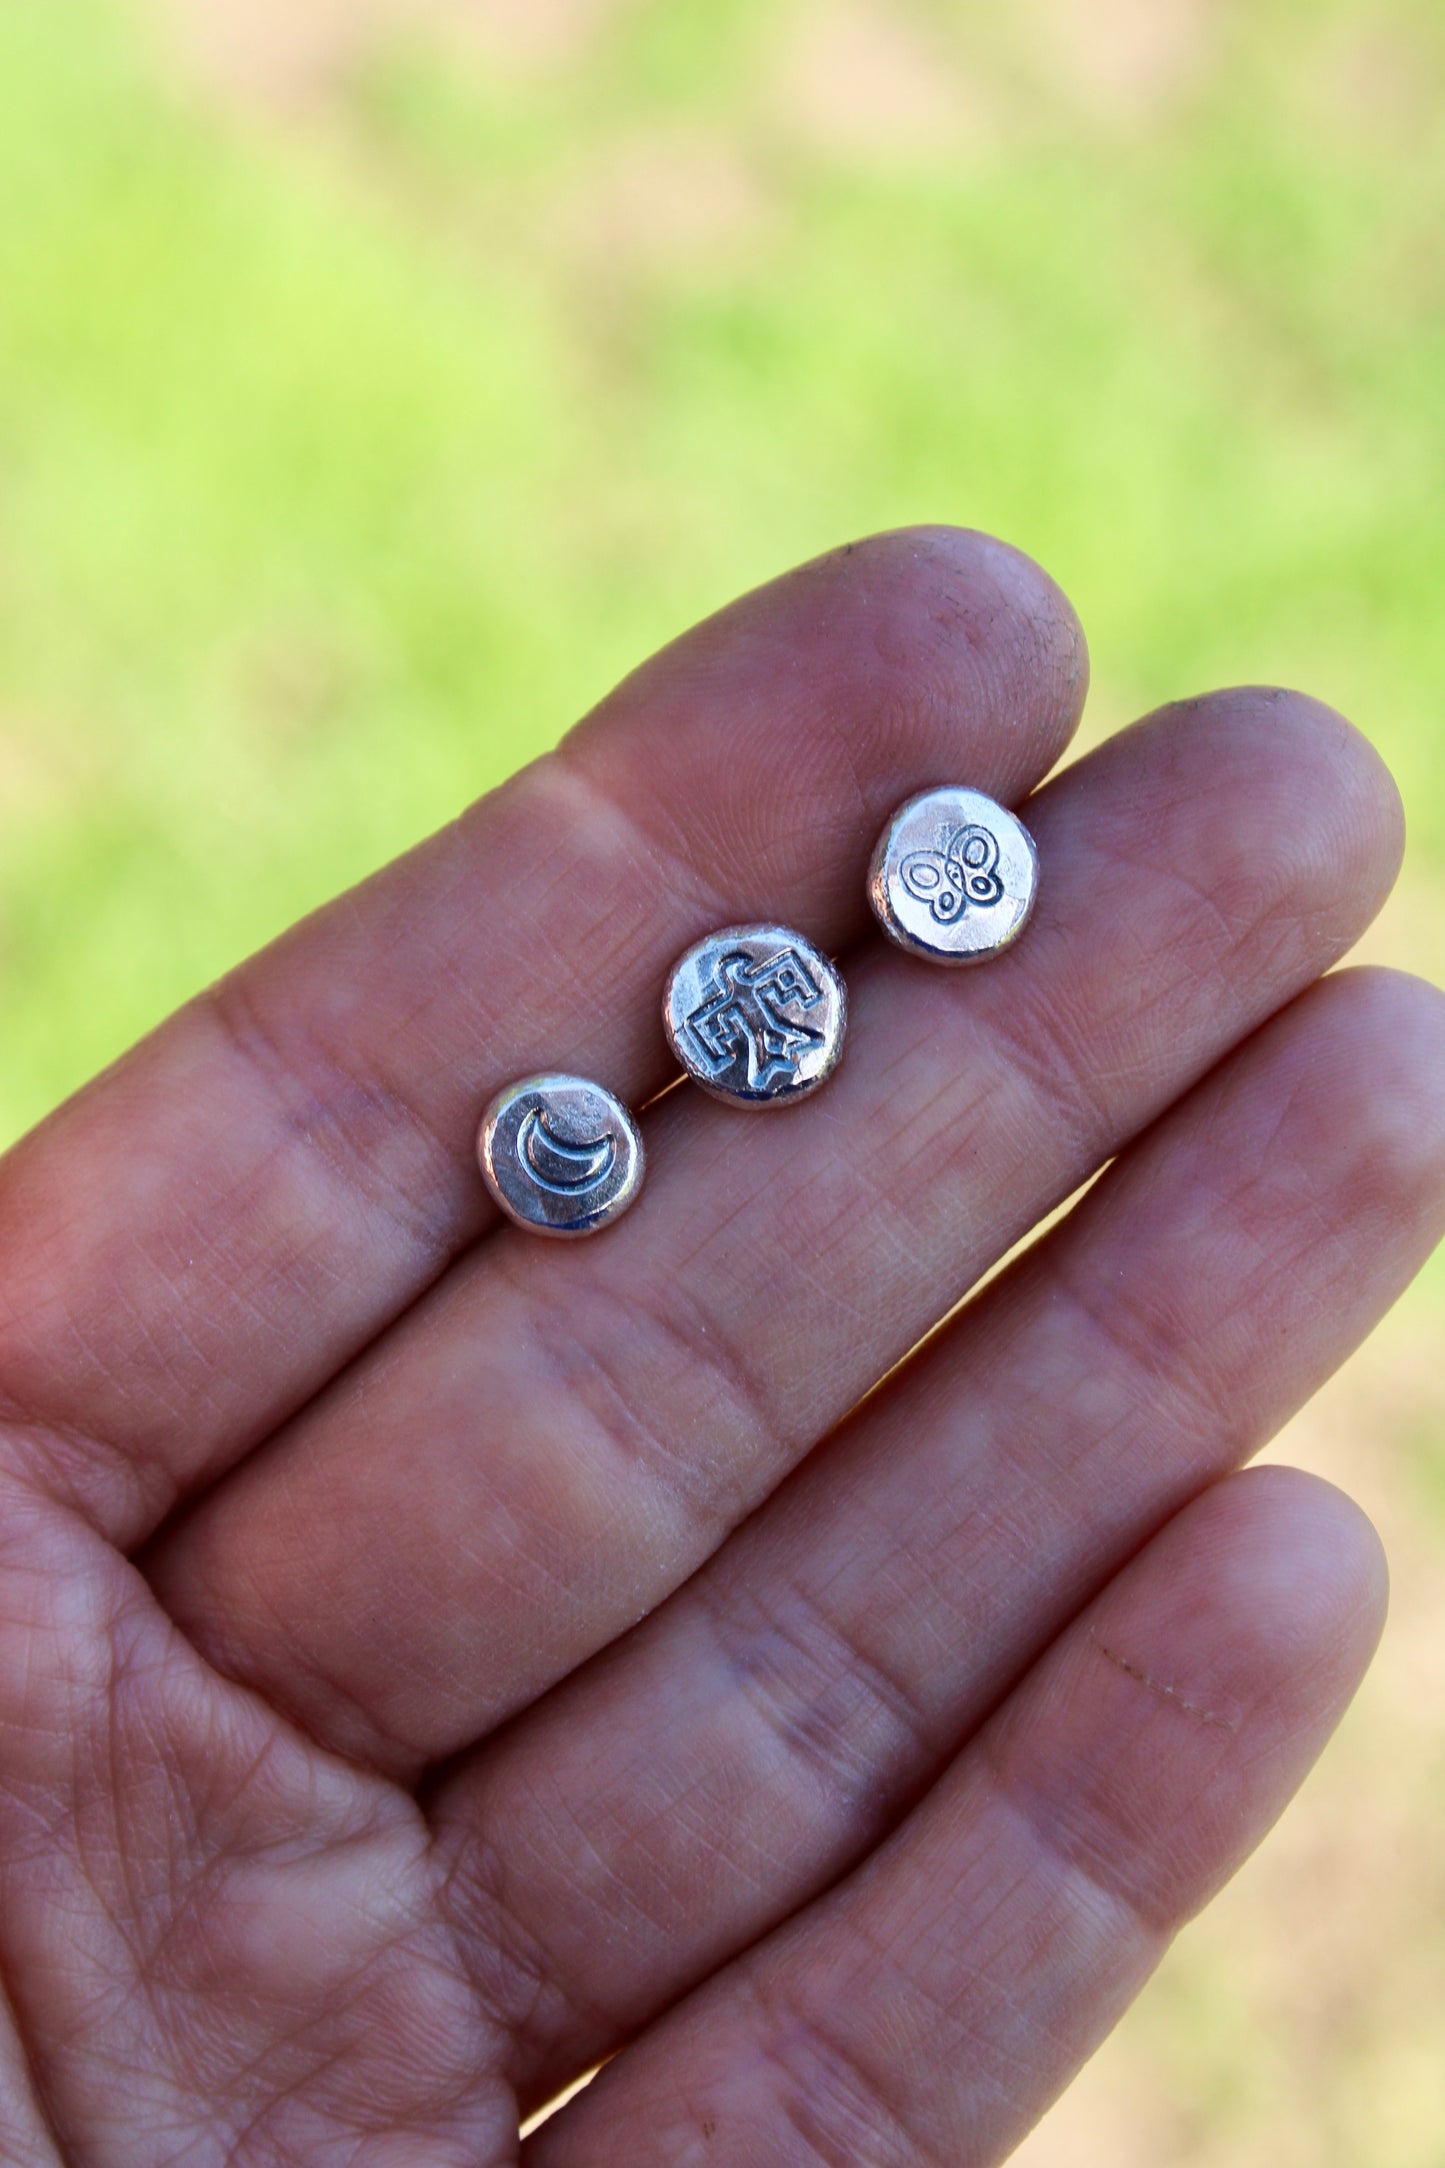 BUTTON STUDS RECYCLED SILVER